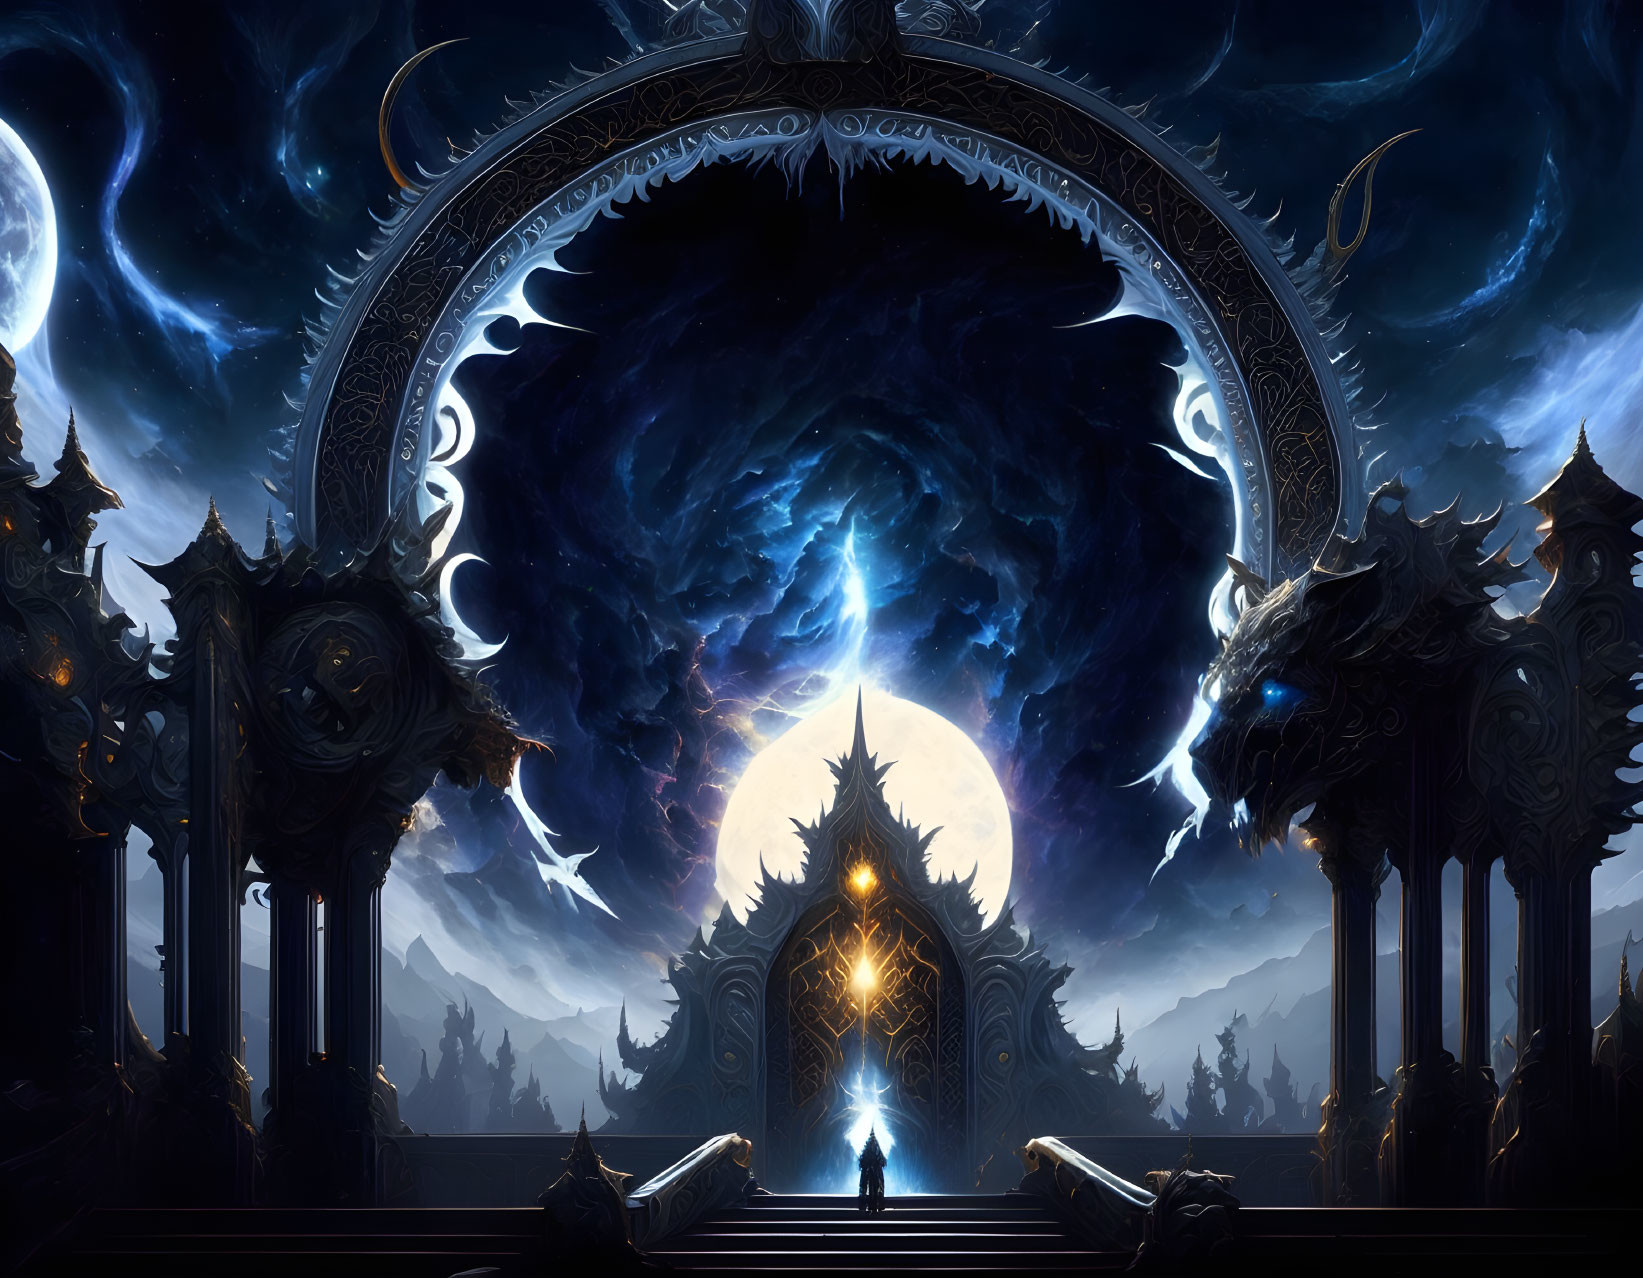 Solitary figure at ornate gate under cosmic sky with moon and dark spires